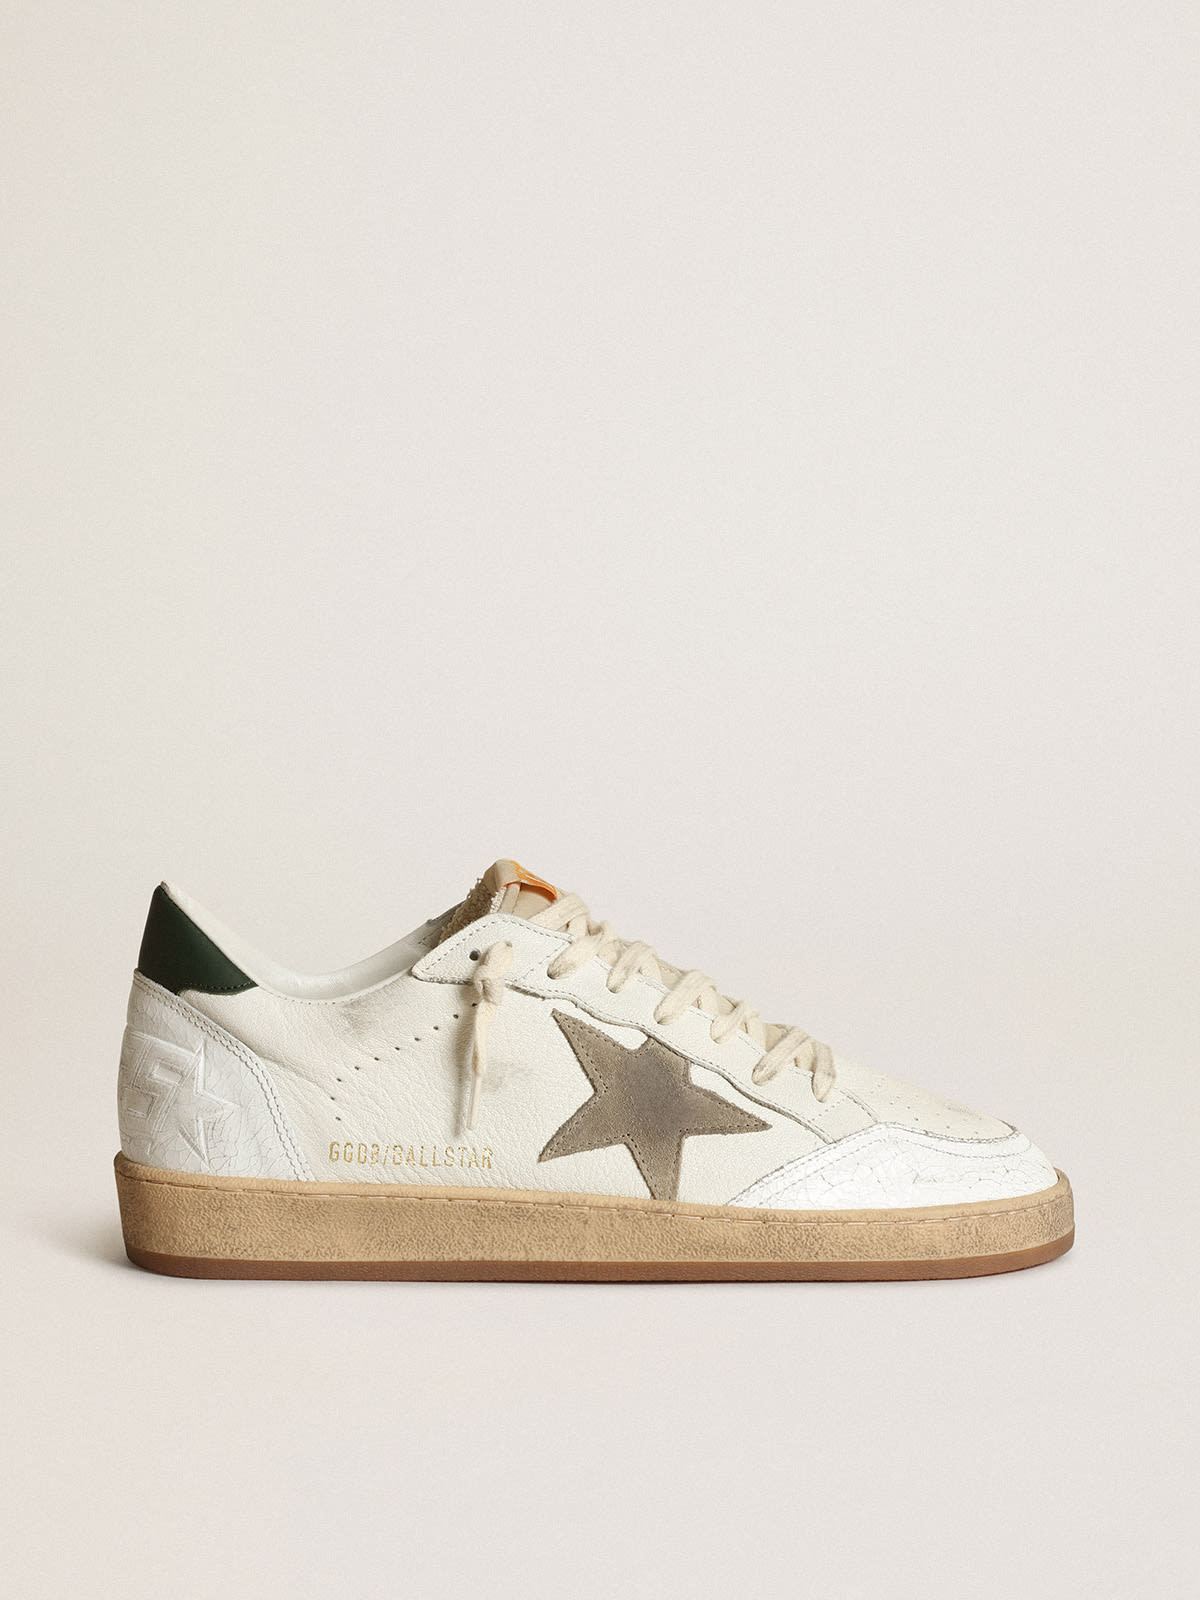 Mid Star sneakers in white leather with blue star and dove-gray 